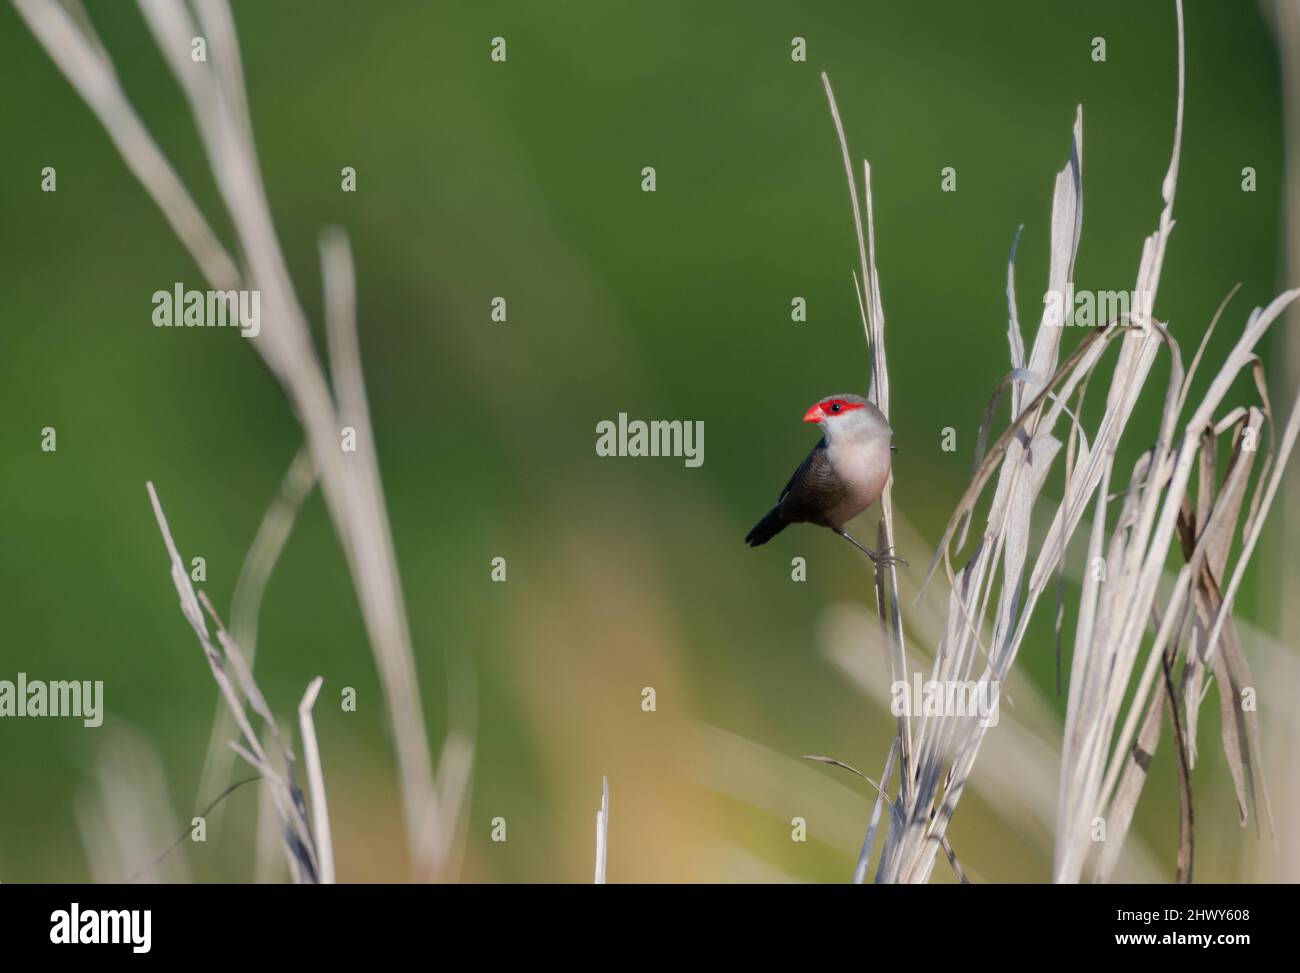 Common Waxbill bird, Estrilda astrild, perched in the tall grass in a field against a green background. Stock Photo